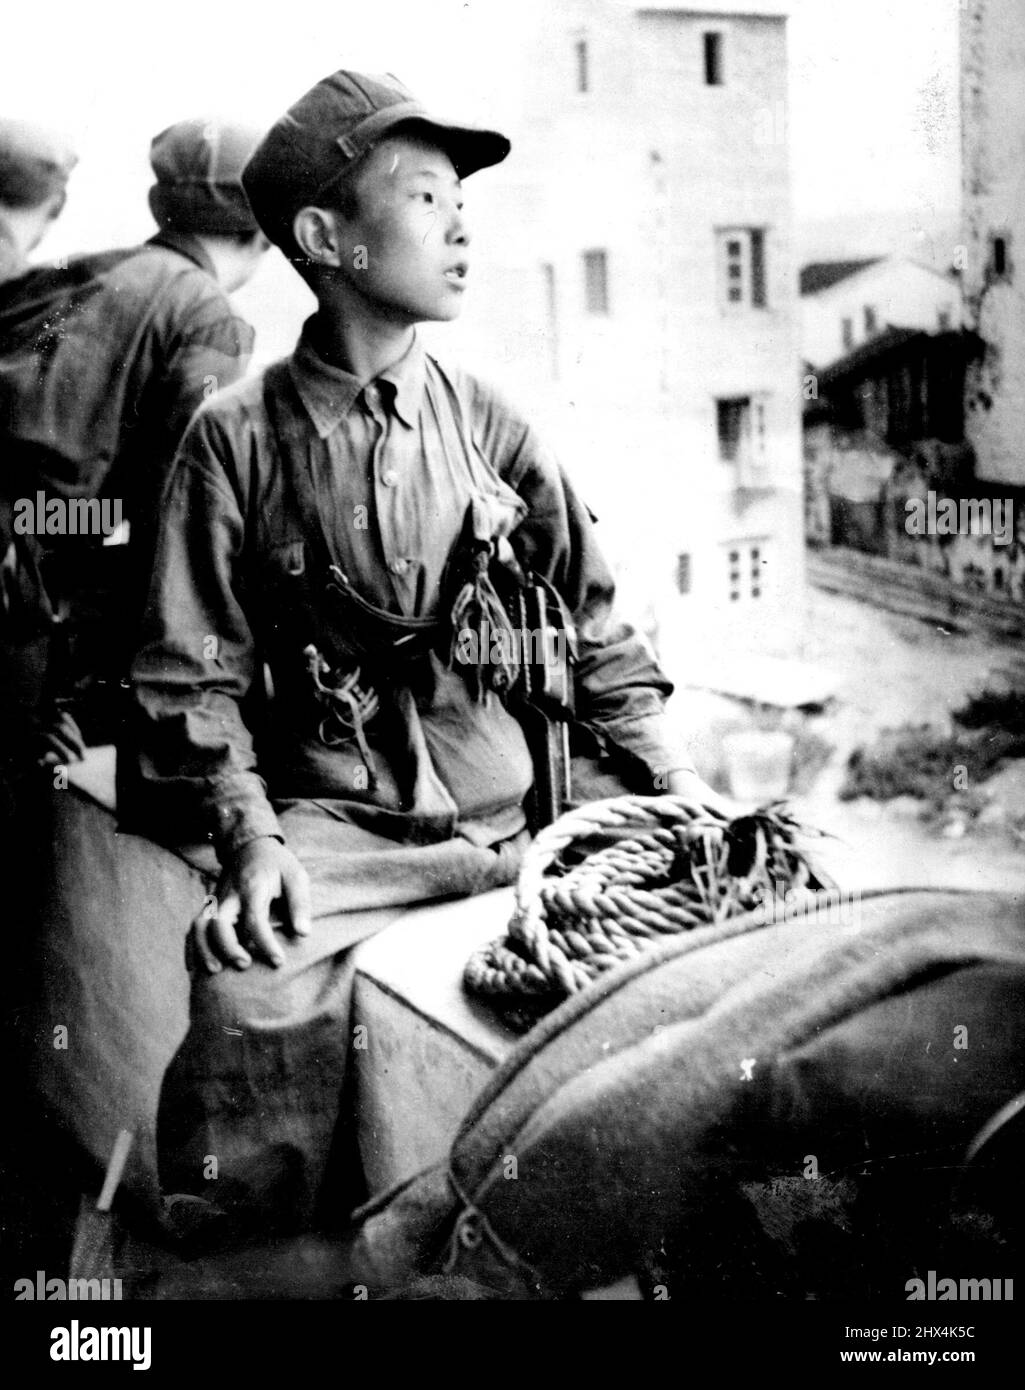 Armed Boy On Hong Kong's Border -- At an age when most boys are still playing with toy weapons, this youthful soldier of the Chinese Communist Army is serving in the garrison at Shumchun, a newly-occupied large town just north of the point where the Canton-Kowloon railway crosses the frontier into Hong Kong colonial territory Many of the Communist newcomers appear no more than 14 or 15 years of age but, like this boy, may be well armed, with pistol and grenade at the belt. October 27, 1949. (Photo by Reuterphoto). Stock Photo